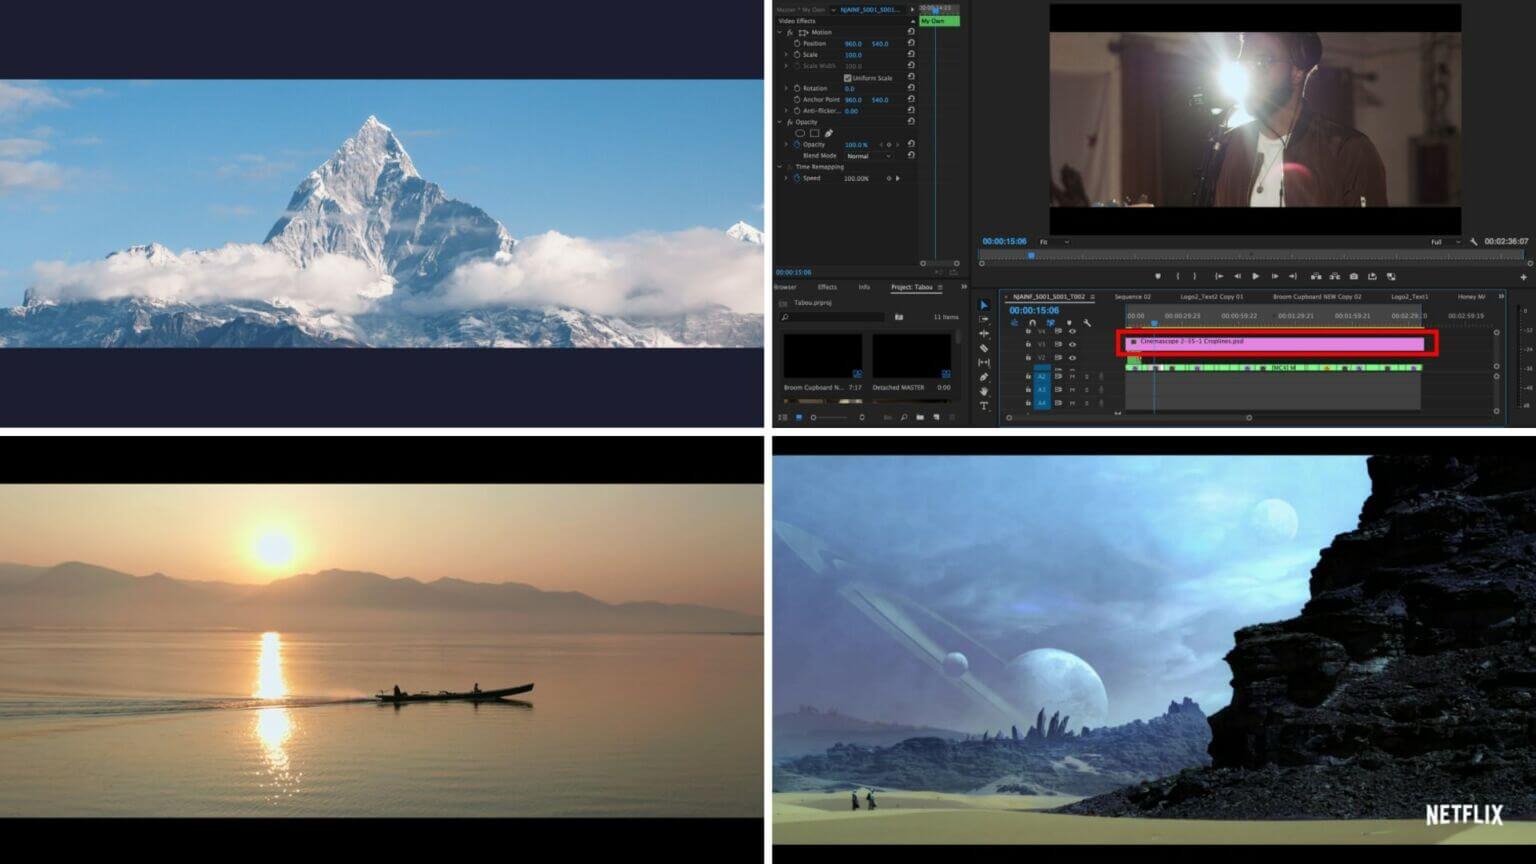 Cinematic Bars How To Add Black Bars To Video Downloads